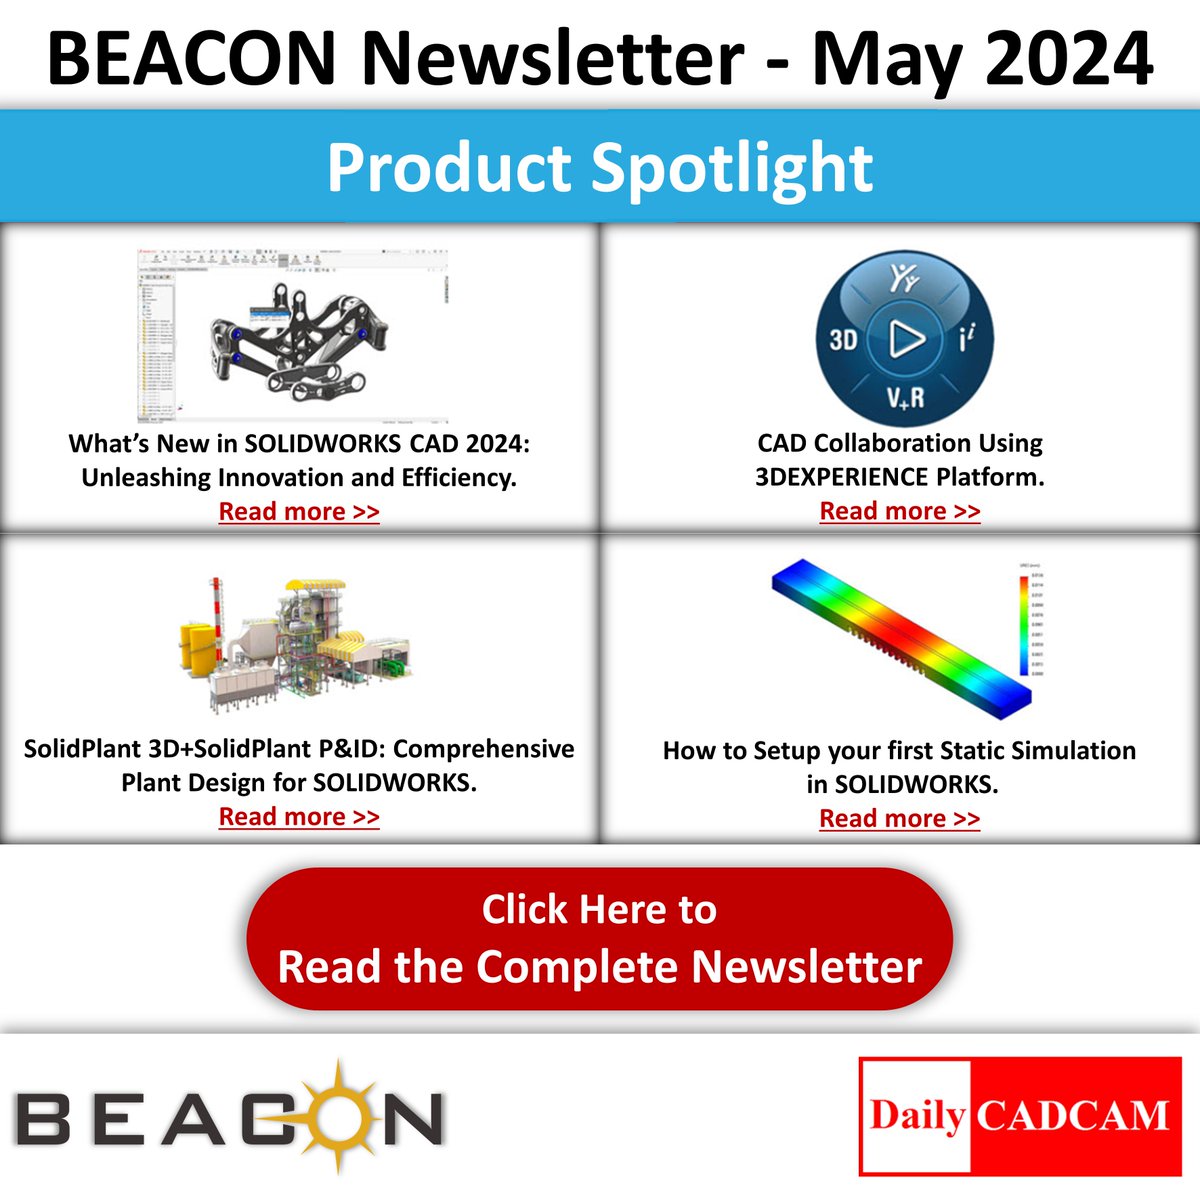 Our latest #Newsletter, May 2024 Edition, in partnership with @dailycadcam is now Live. Dive into exclusive content on Modeling & Simulation which can help to enhance Product Development Click here to Read the Complete Newsletter: beacon-india.com/wp-content/upl… #BEACONIndia #May2024